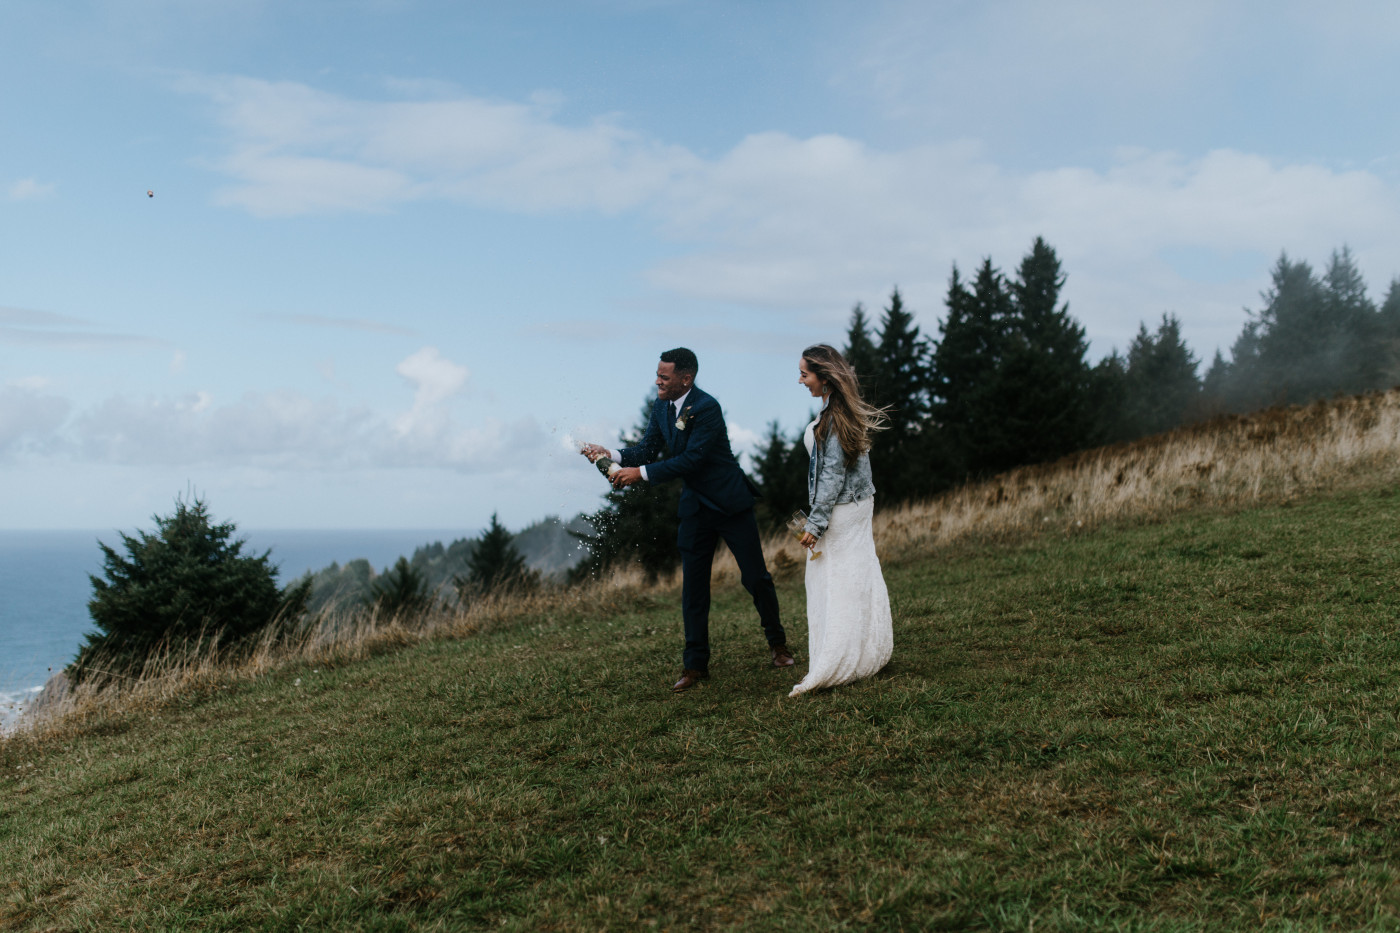 Deandre and Ariana pop champagne. Elopement photography at Mount Hood by Sienna Plus Josh.